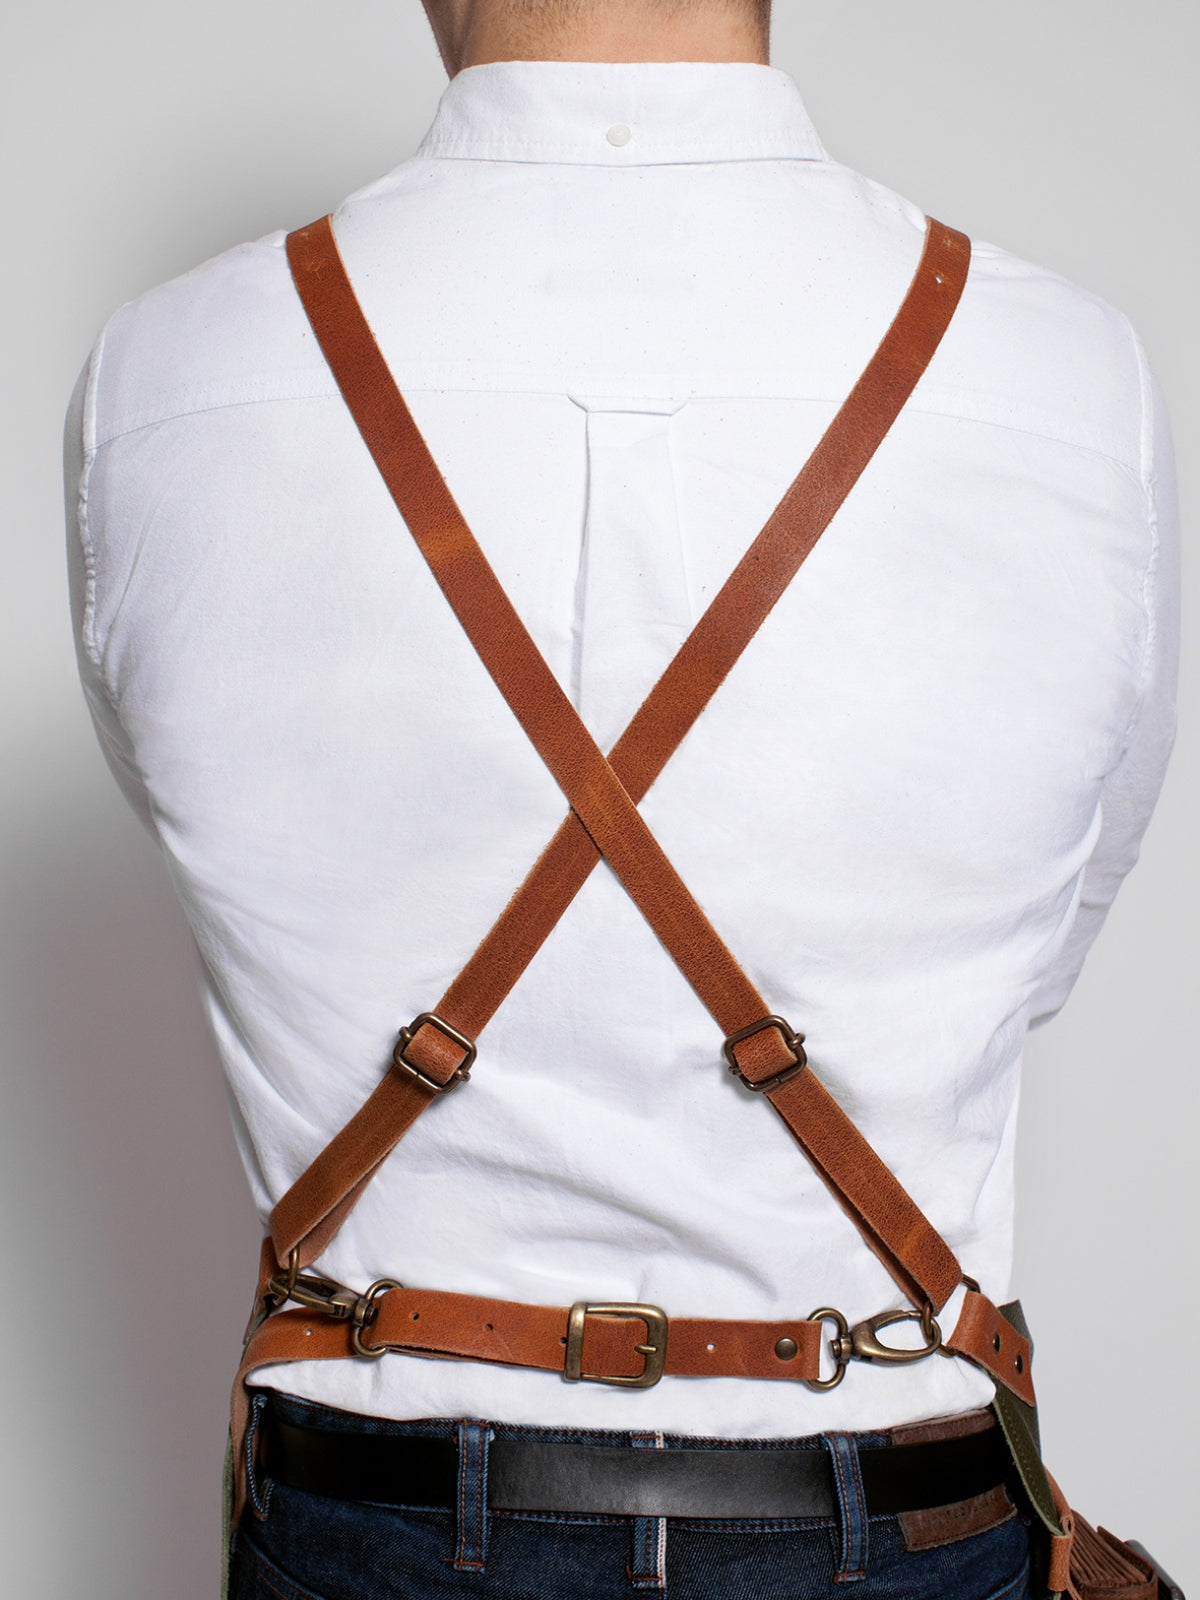 Leather Apron Cross Strap Deluxe Brown by STW -  ChefsCotton